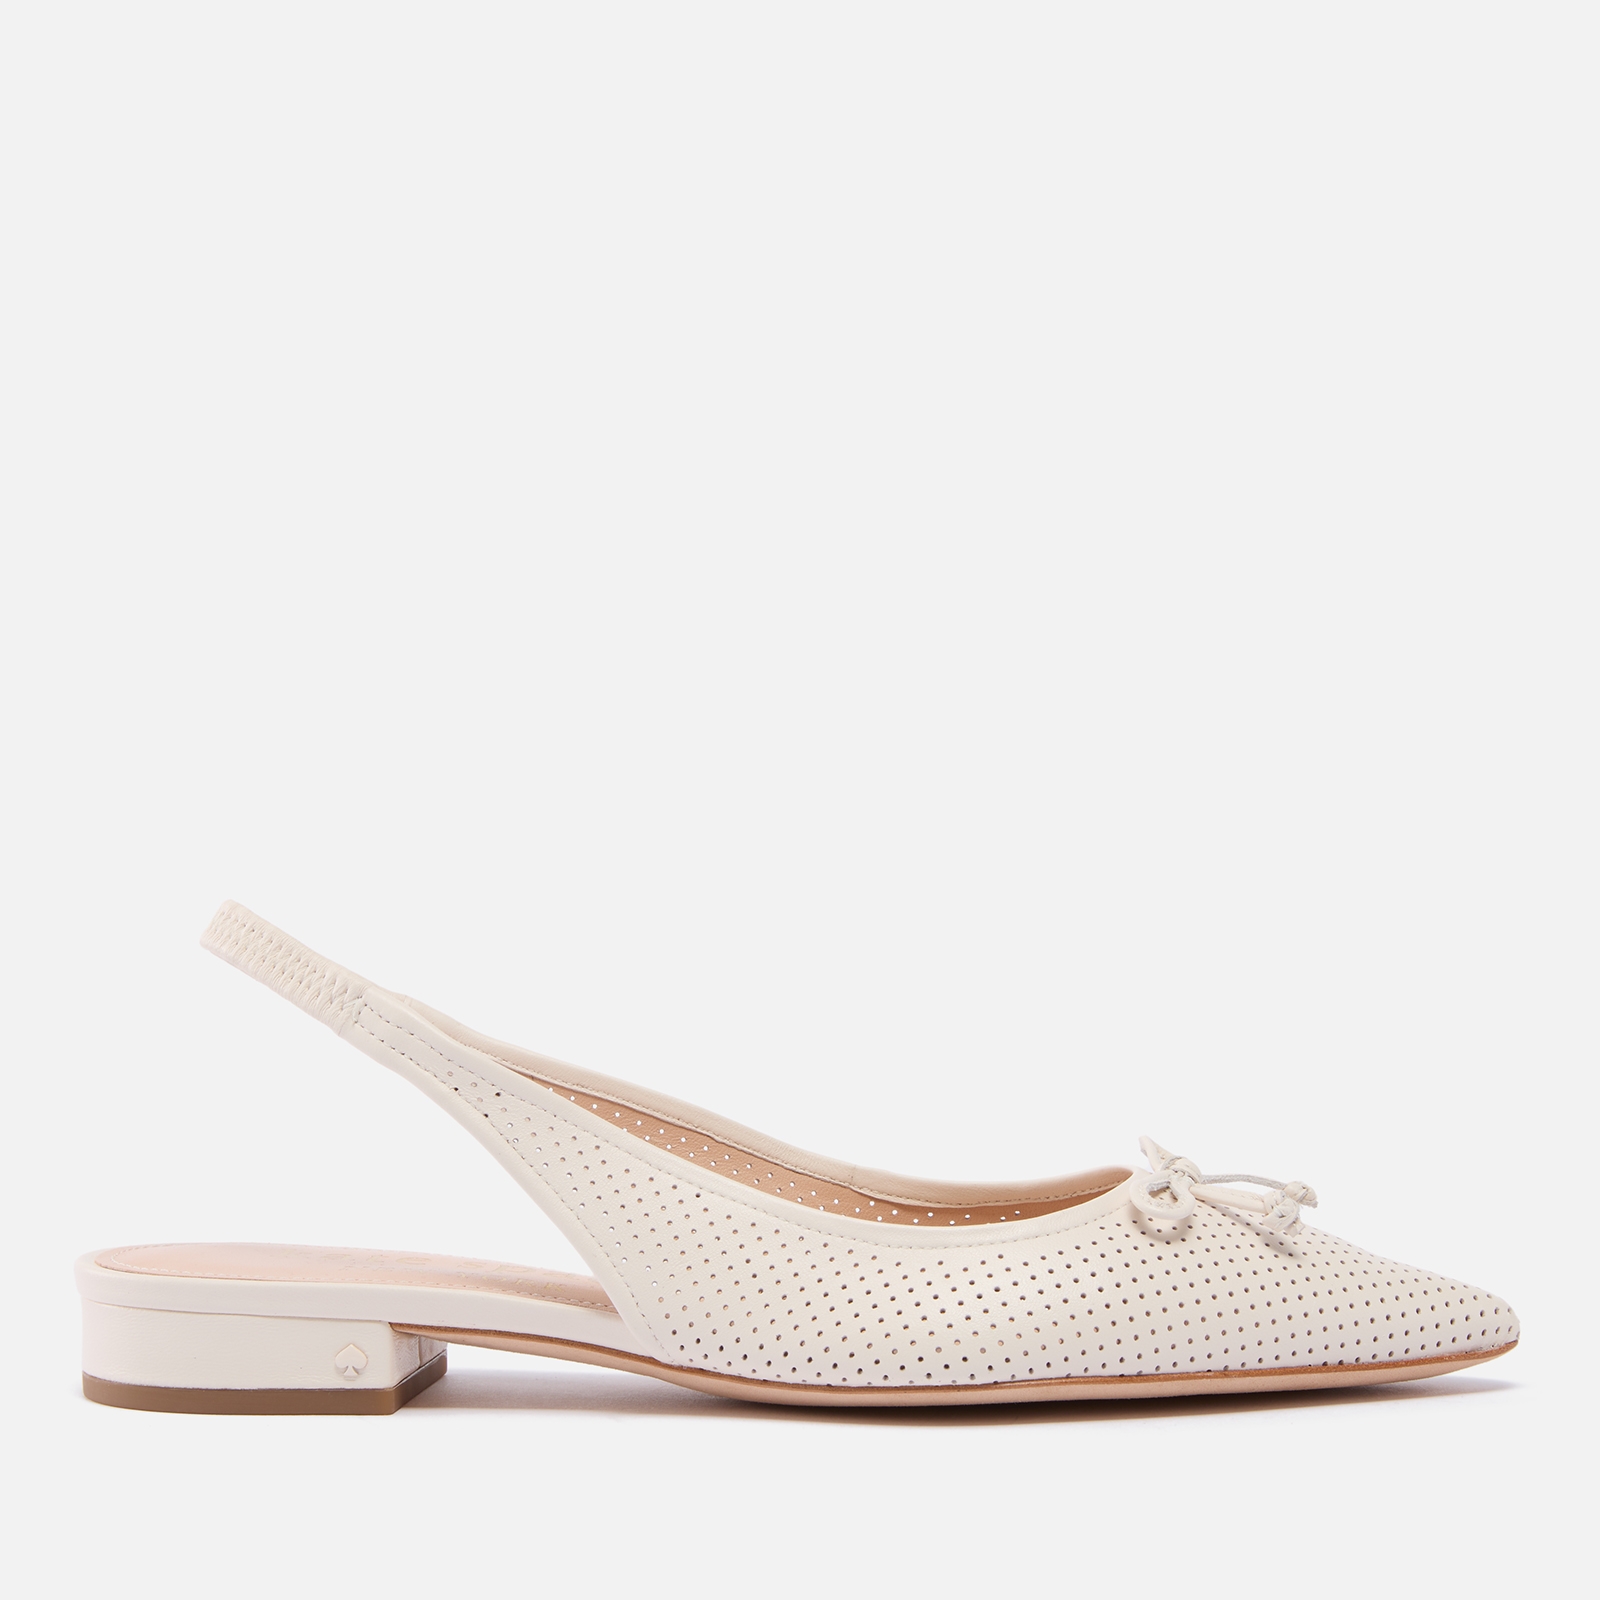 Kate Spade New York Women's Veronica Nappa Leather Flat Shoes